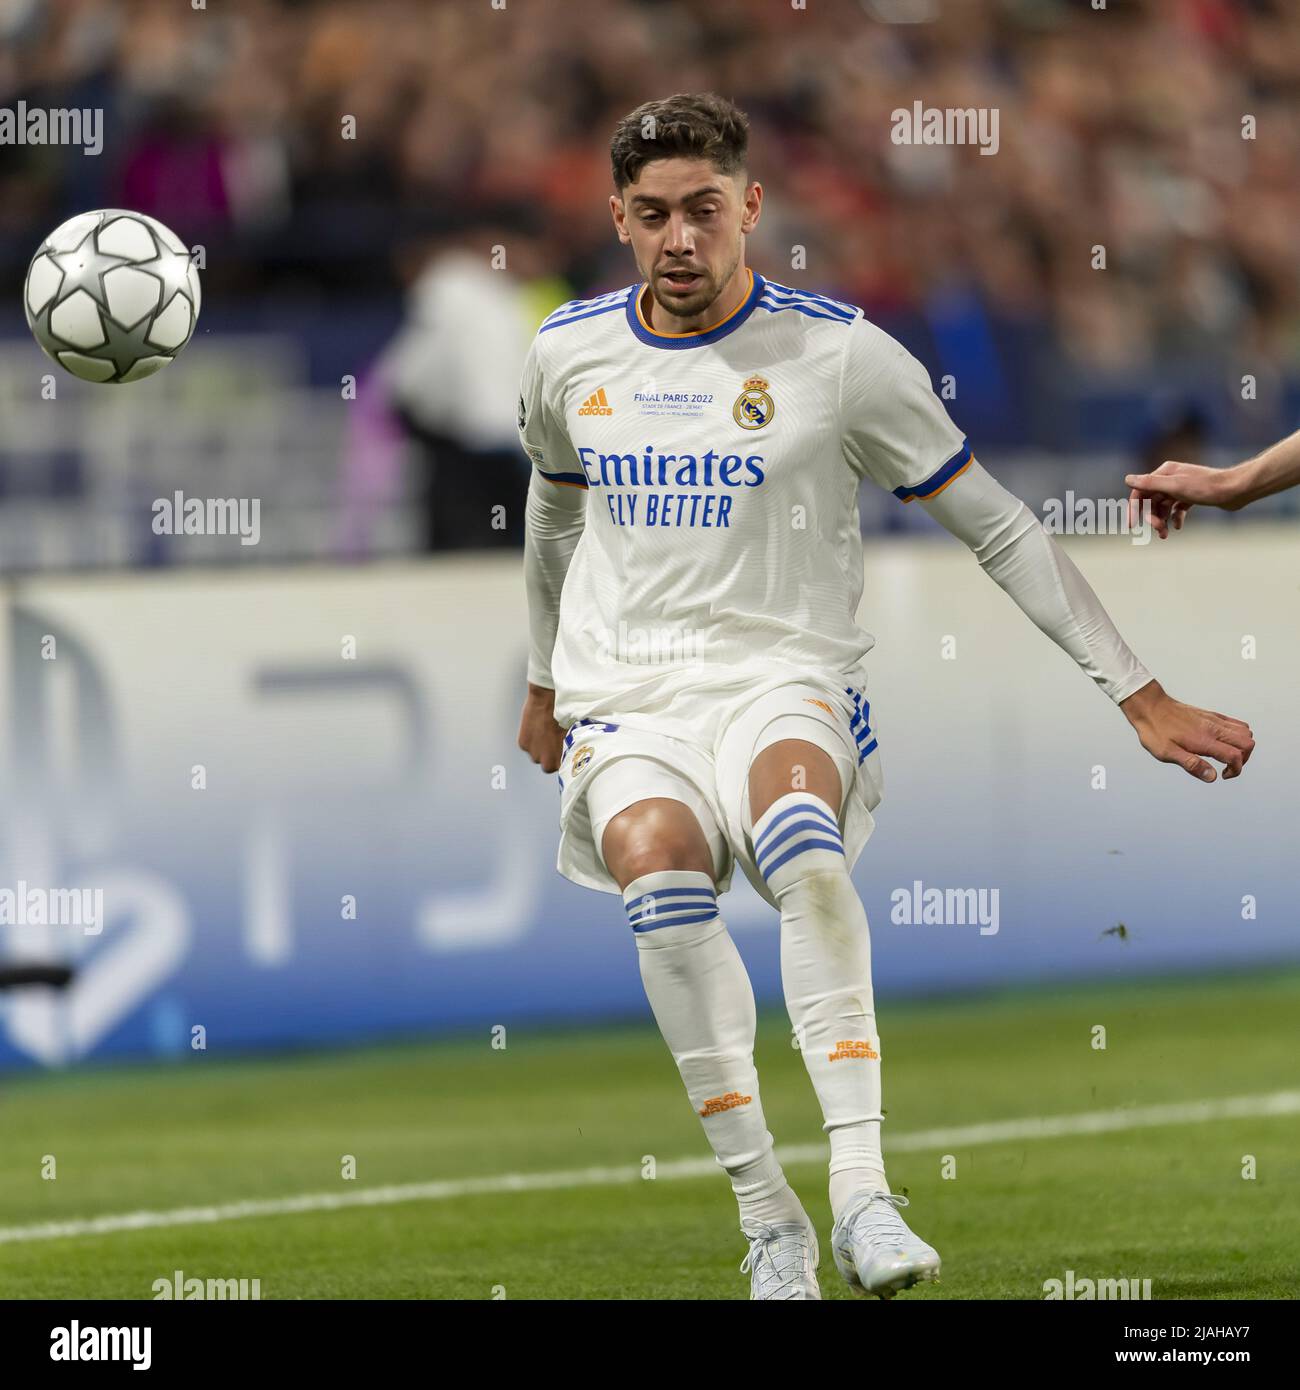 Federico Valverde (Real Madrid) during the Uefa Champions League match  between Liverpool 0-1 Real Madrid